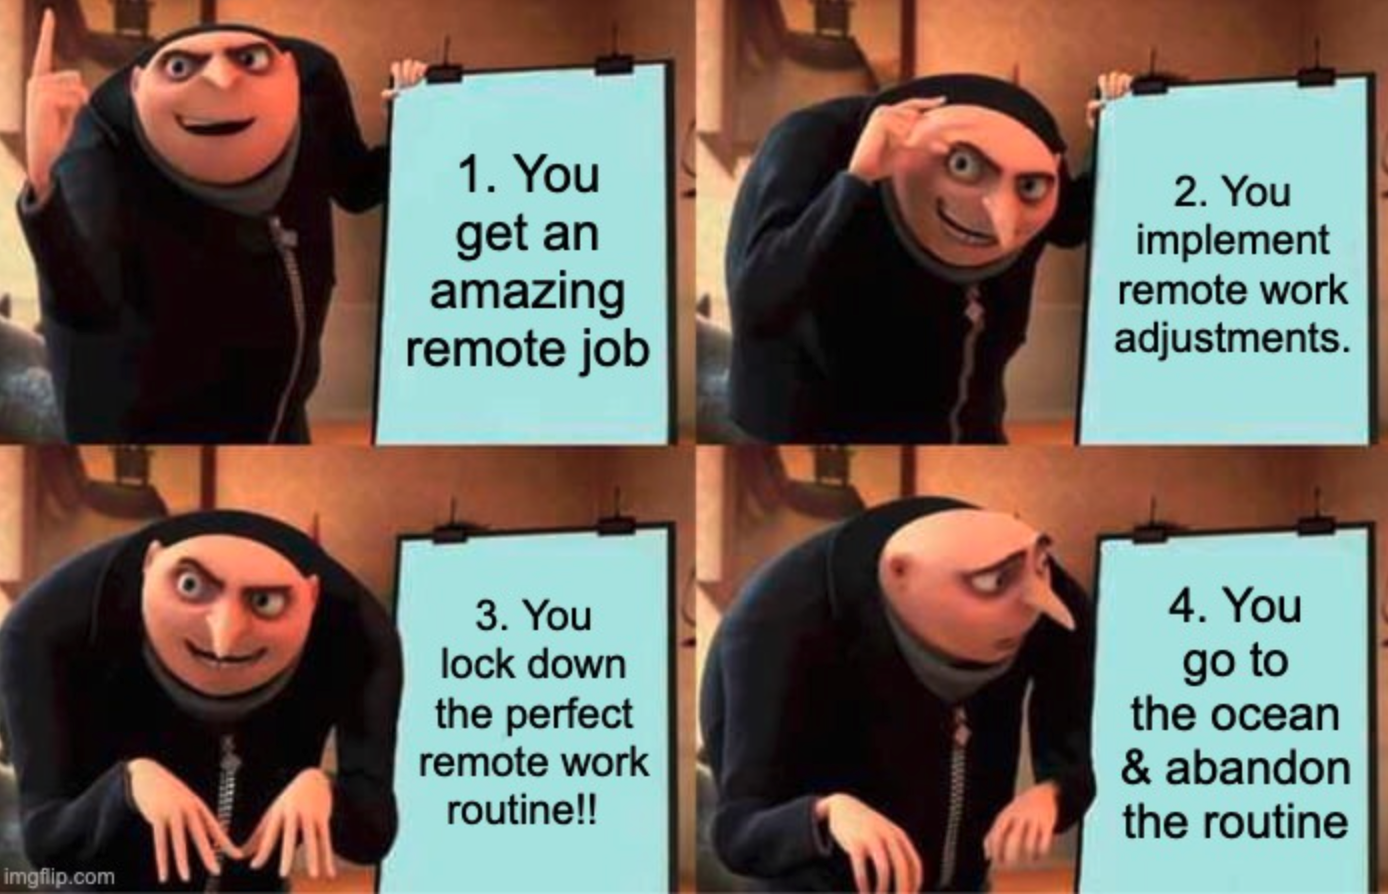 Meme about adjusting to remote work environments (Gru from Despicable me pointing to an easel with text) 